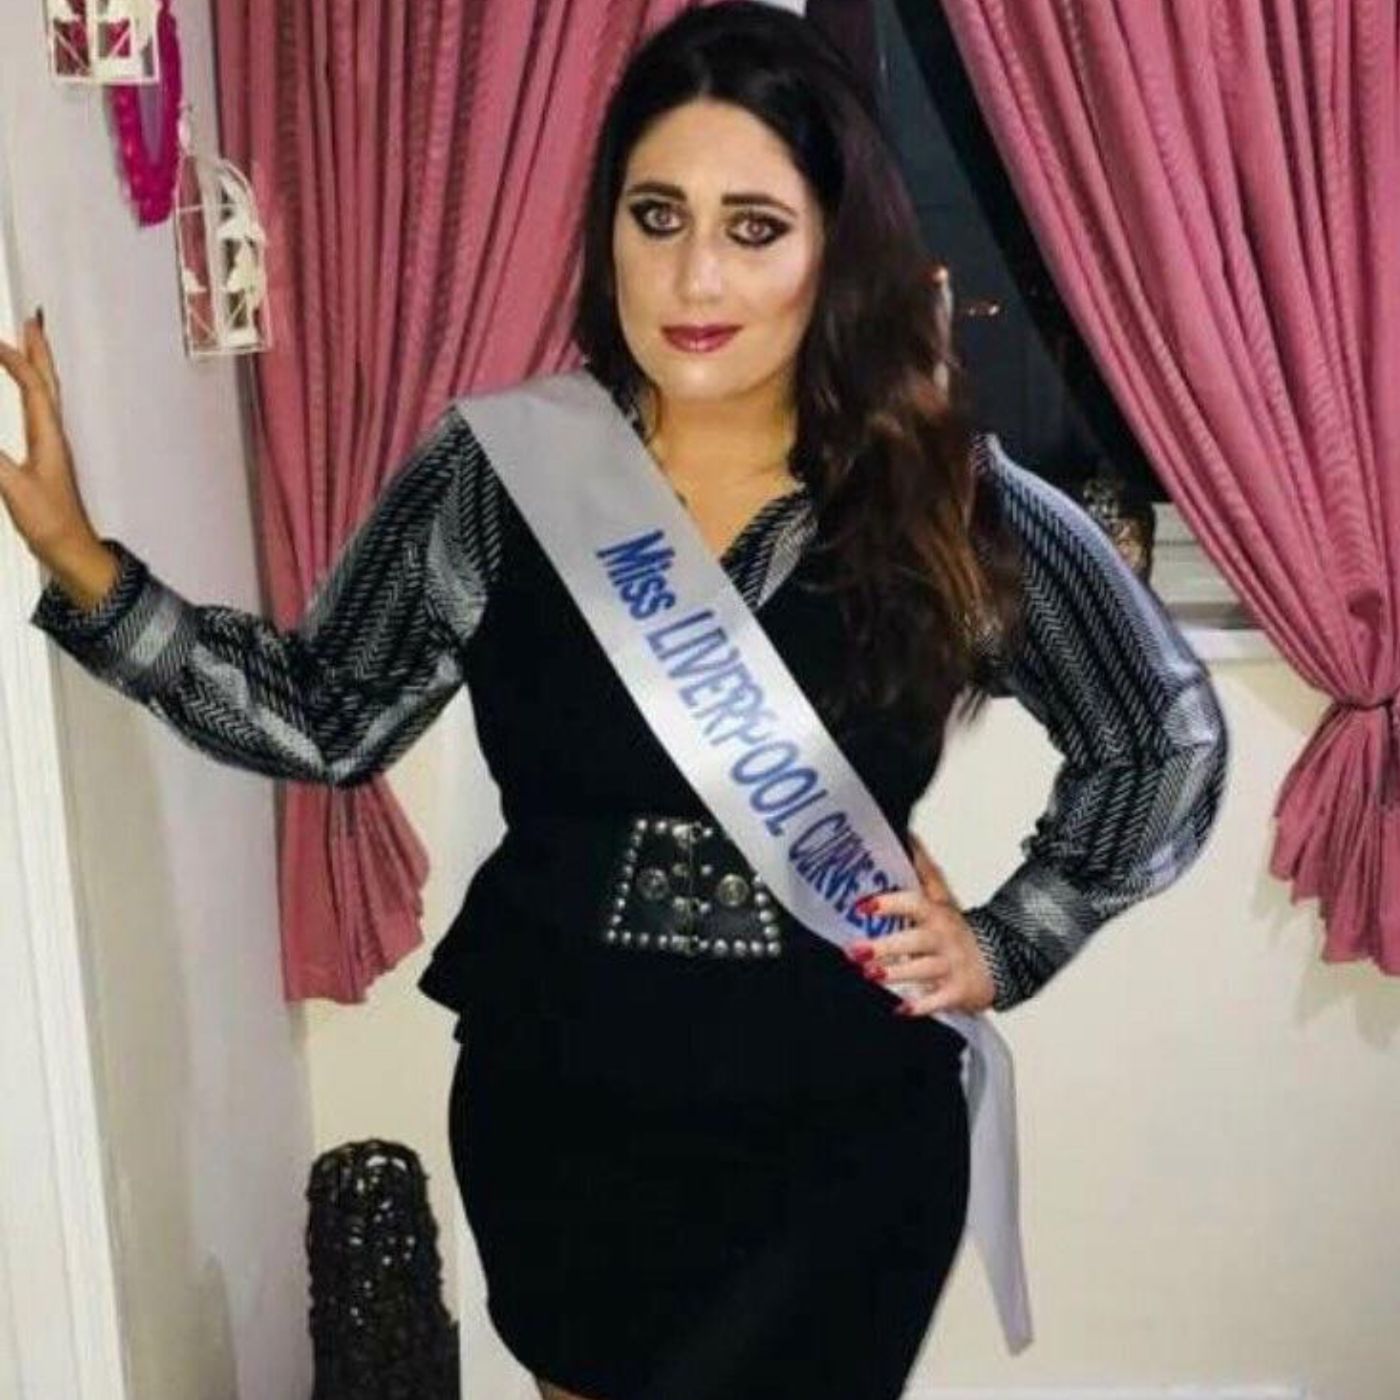 No Really, I’m Fine - How ‘miss curve’ beauty queen overcame an autism, OCD and depression diagnosis to smash body image stereotypes